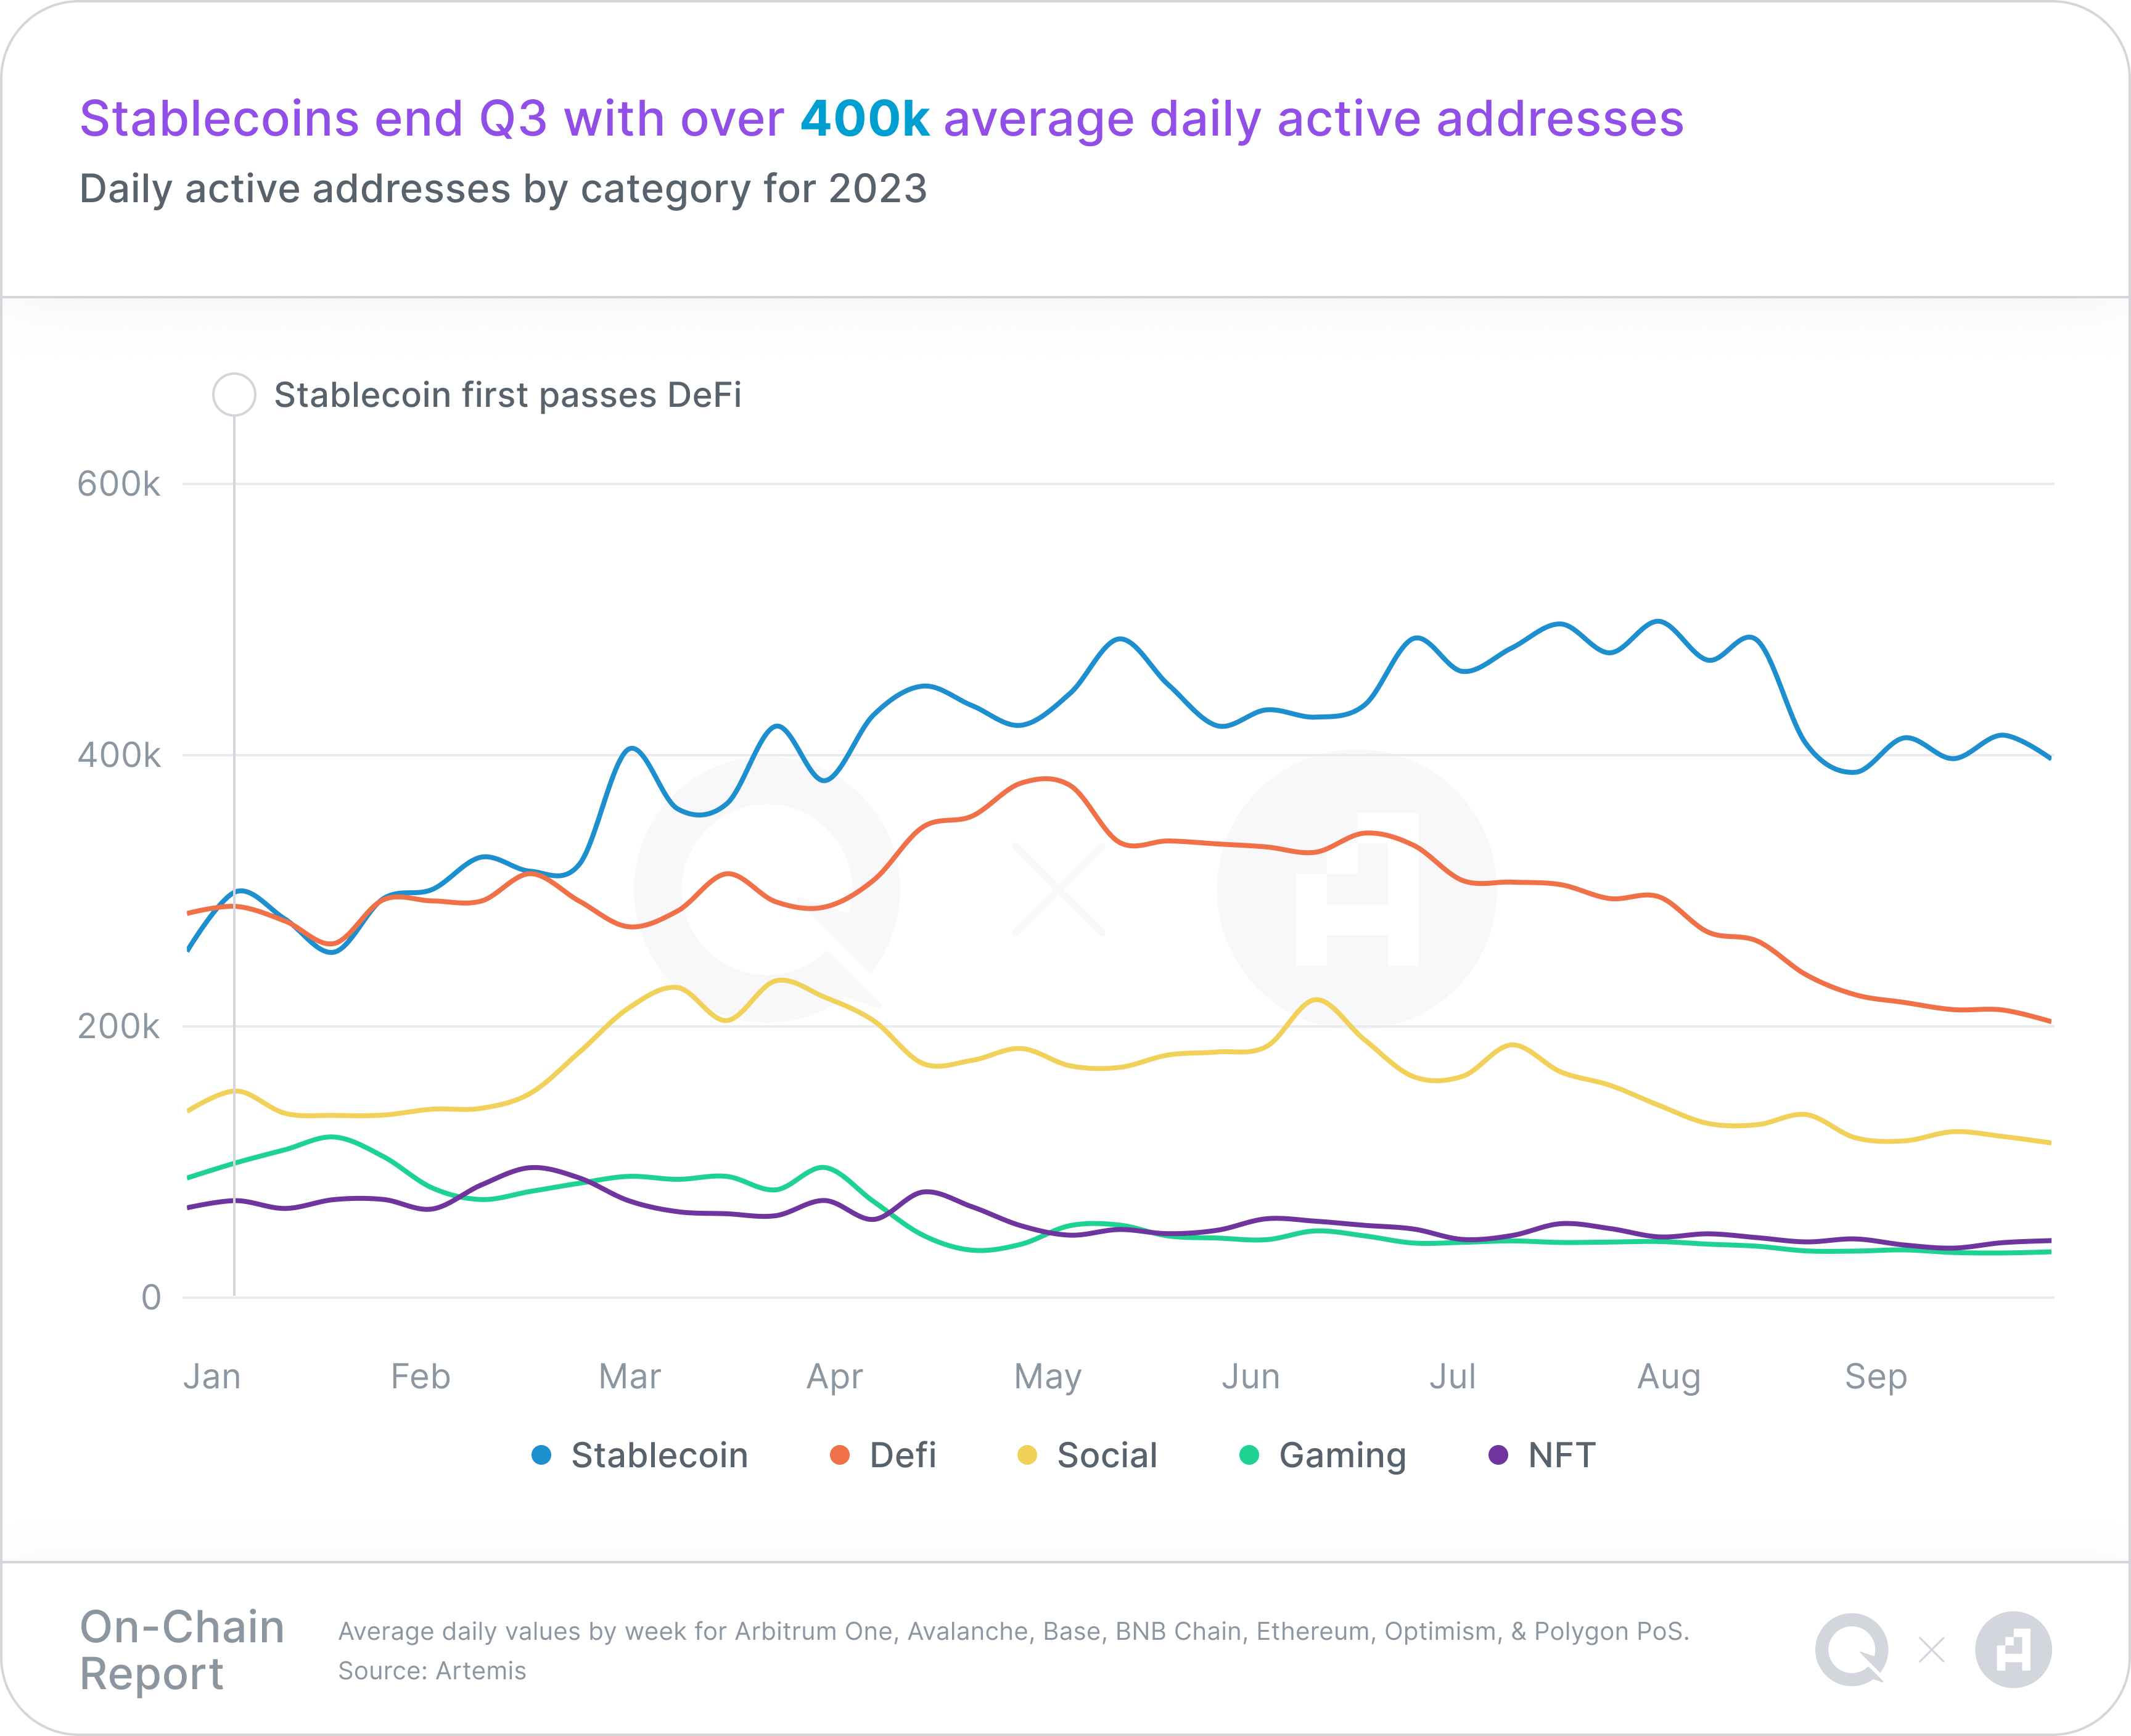 A chart representing daily active addresses by category for 2023, with a takeaway headline of "Stablecoins end Q3 with over 400k average daily active addresses"